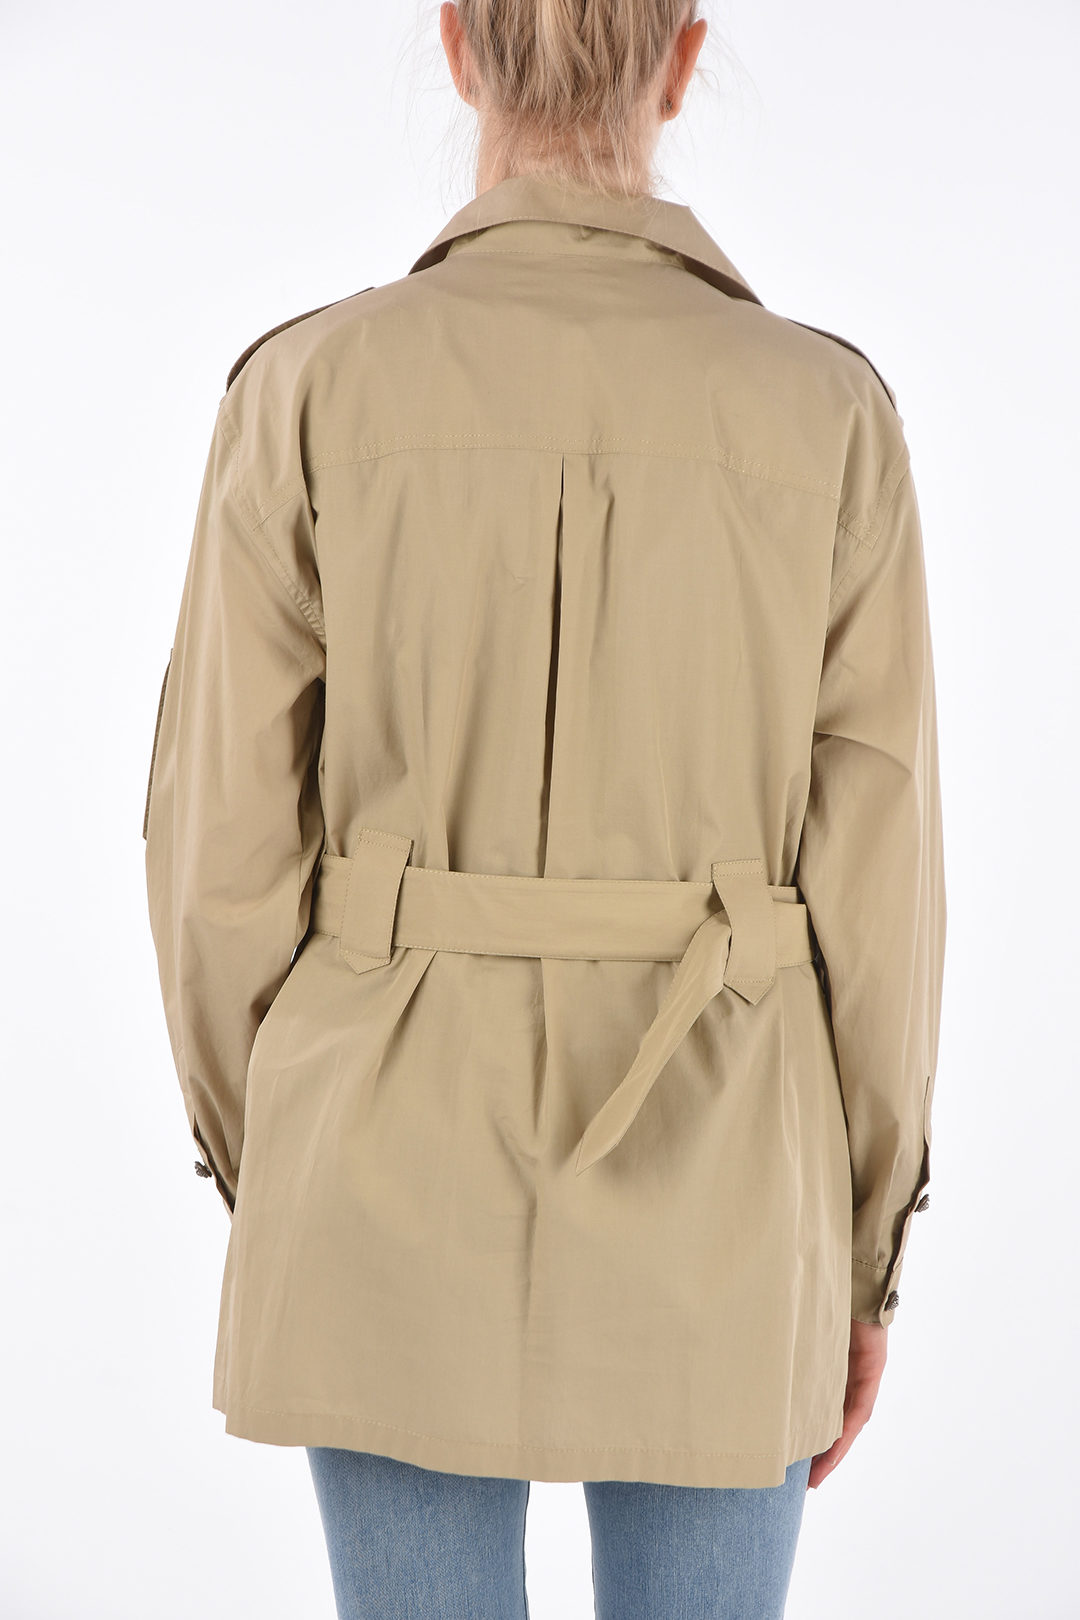 Dolce & Gabbana Belted Cropped Trench women - Glamood Outlet